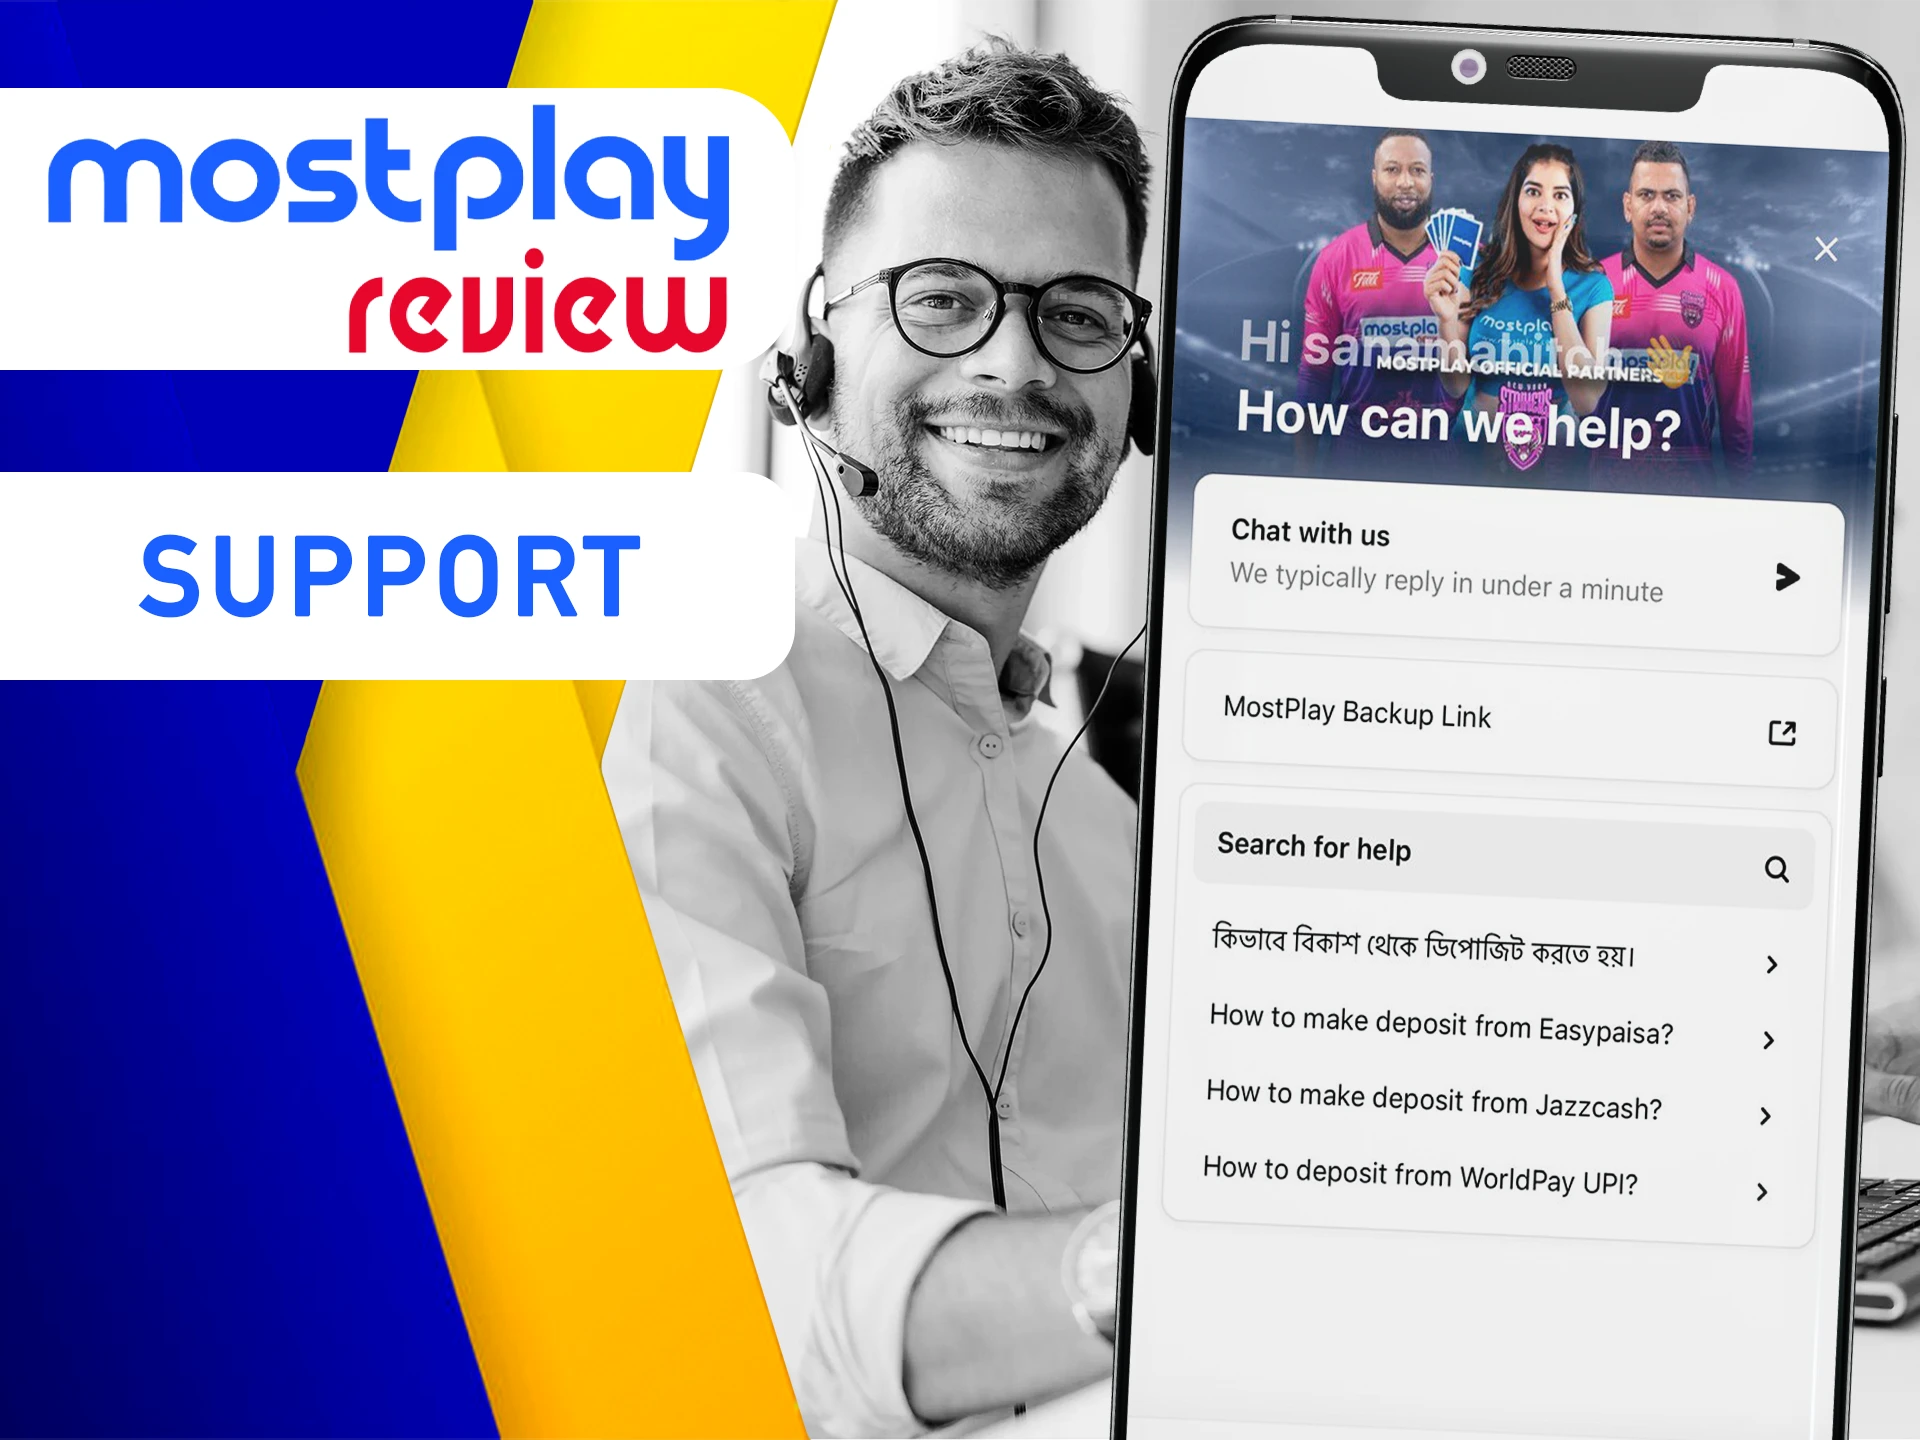 Ask Mostplay support for help if you struggle with something.